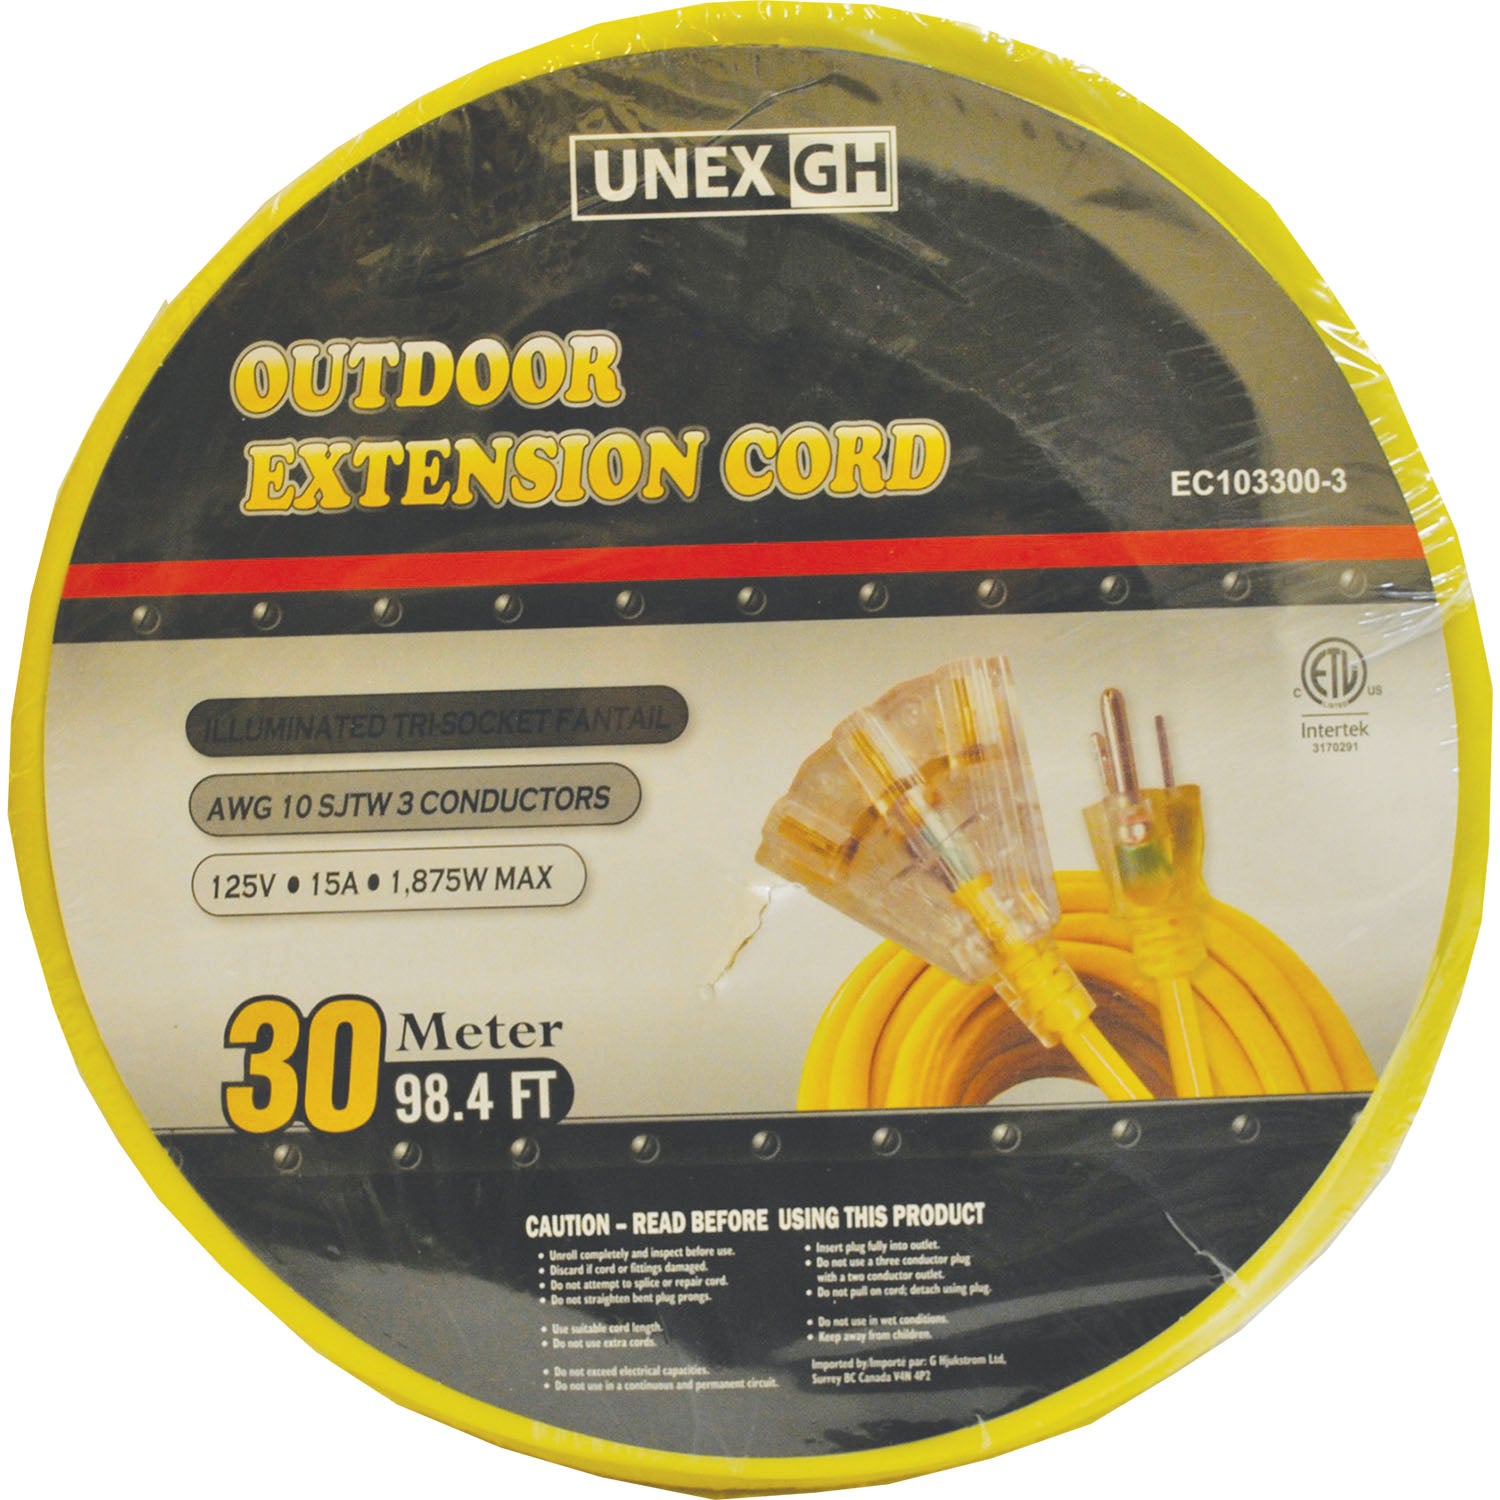 Outdoor Extension Cord - 10 Gauge - 15A Rated - Triple Outlet Maintenance Supplies - Cleanflow